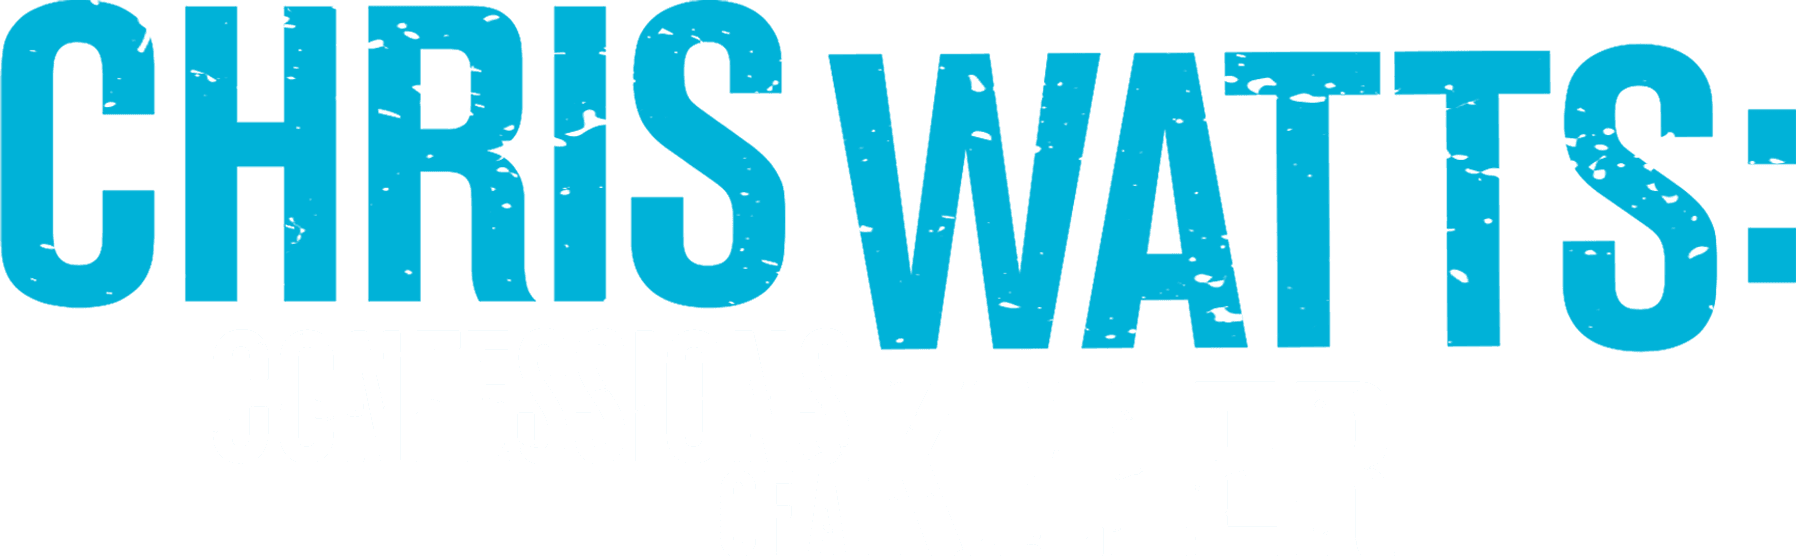 Chris Watts: Confessions of a Killer logo